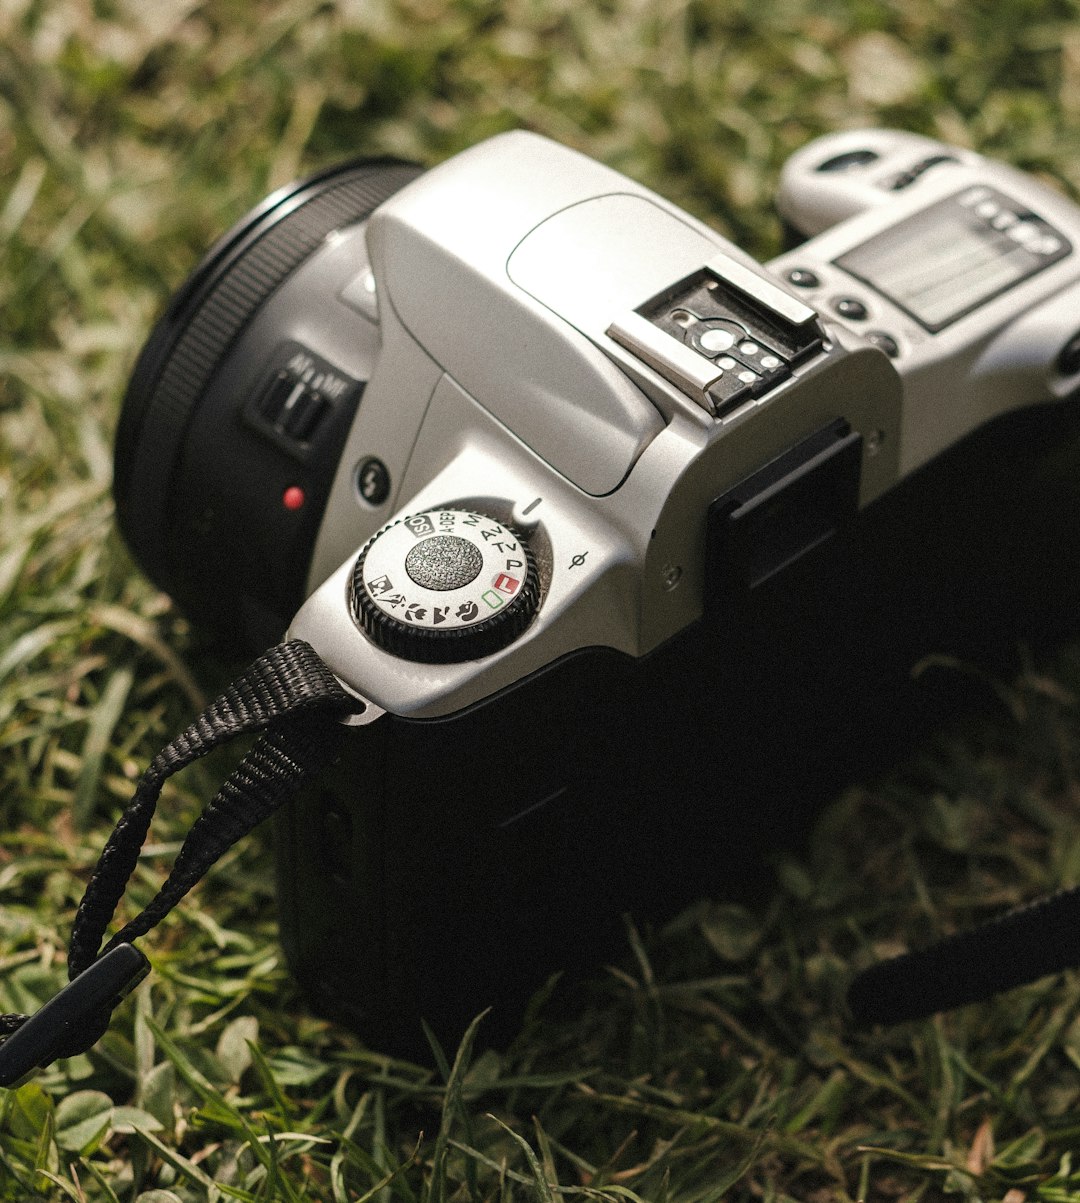 black and silver dslr camera on green grass